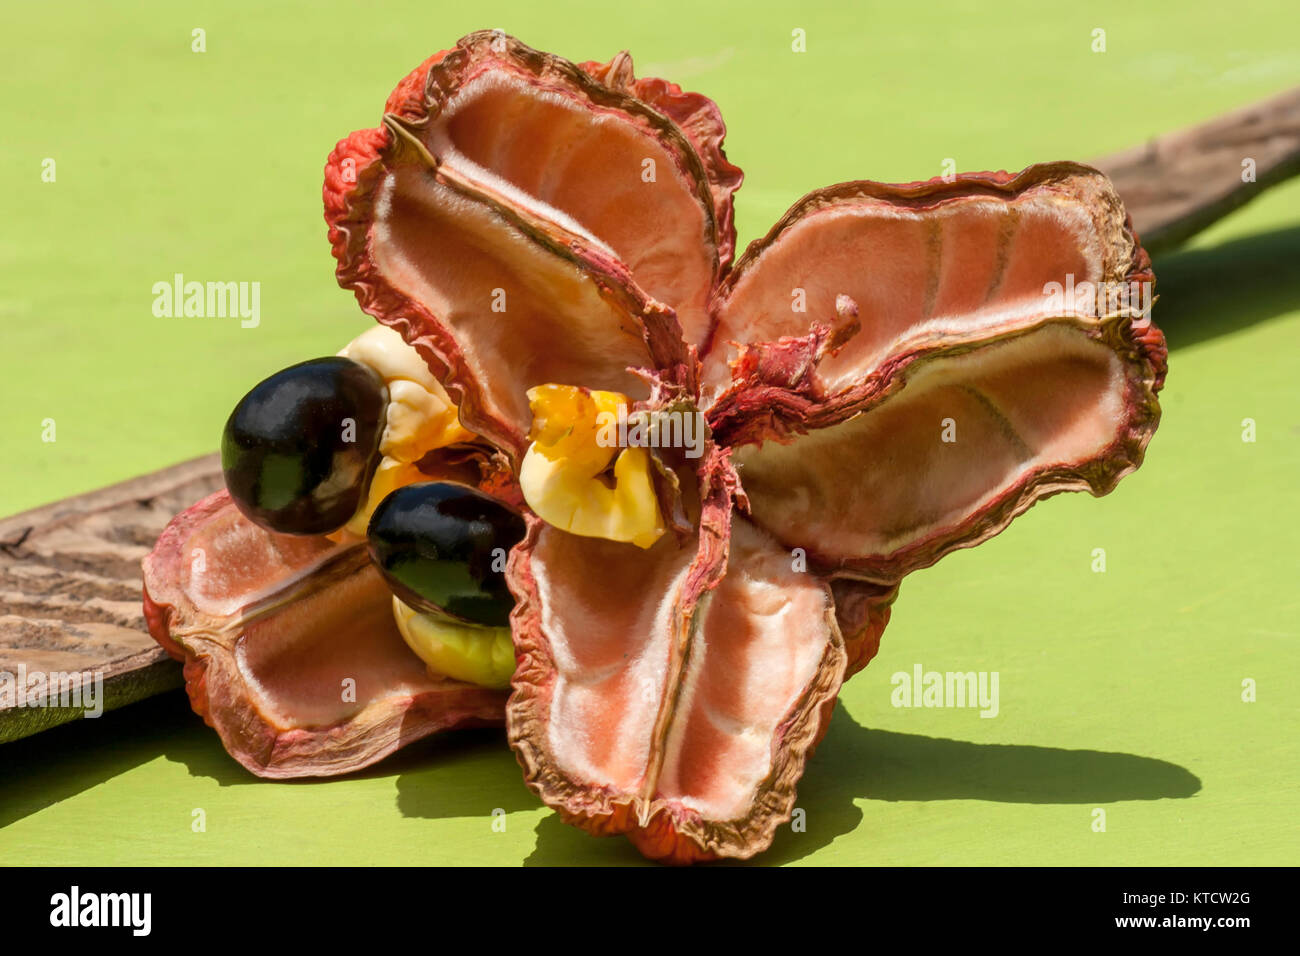 Jamaican ackee in dried pod on black background Stock Photo